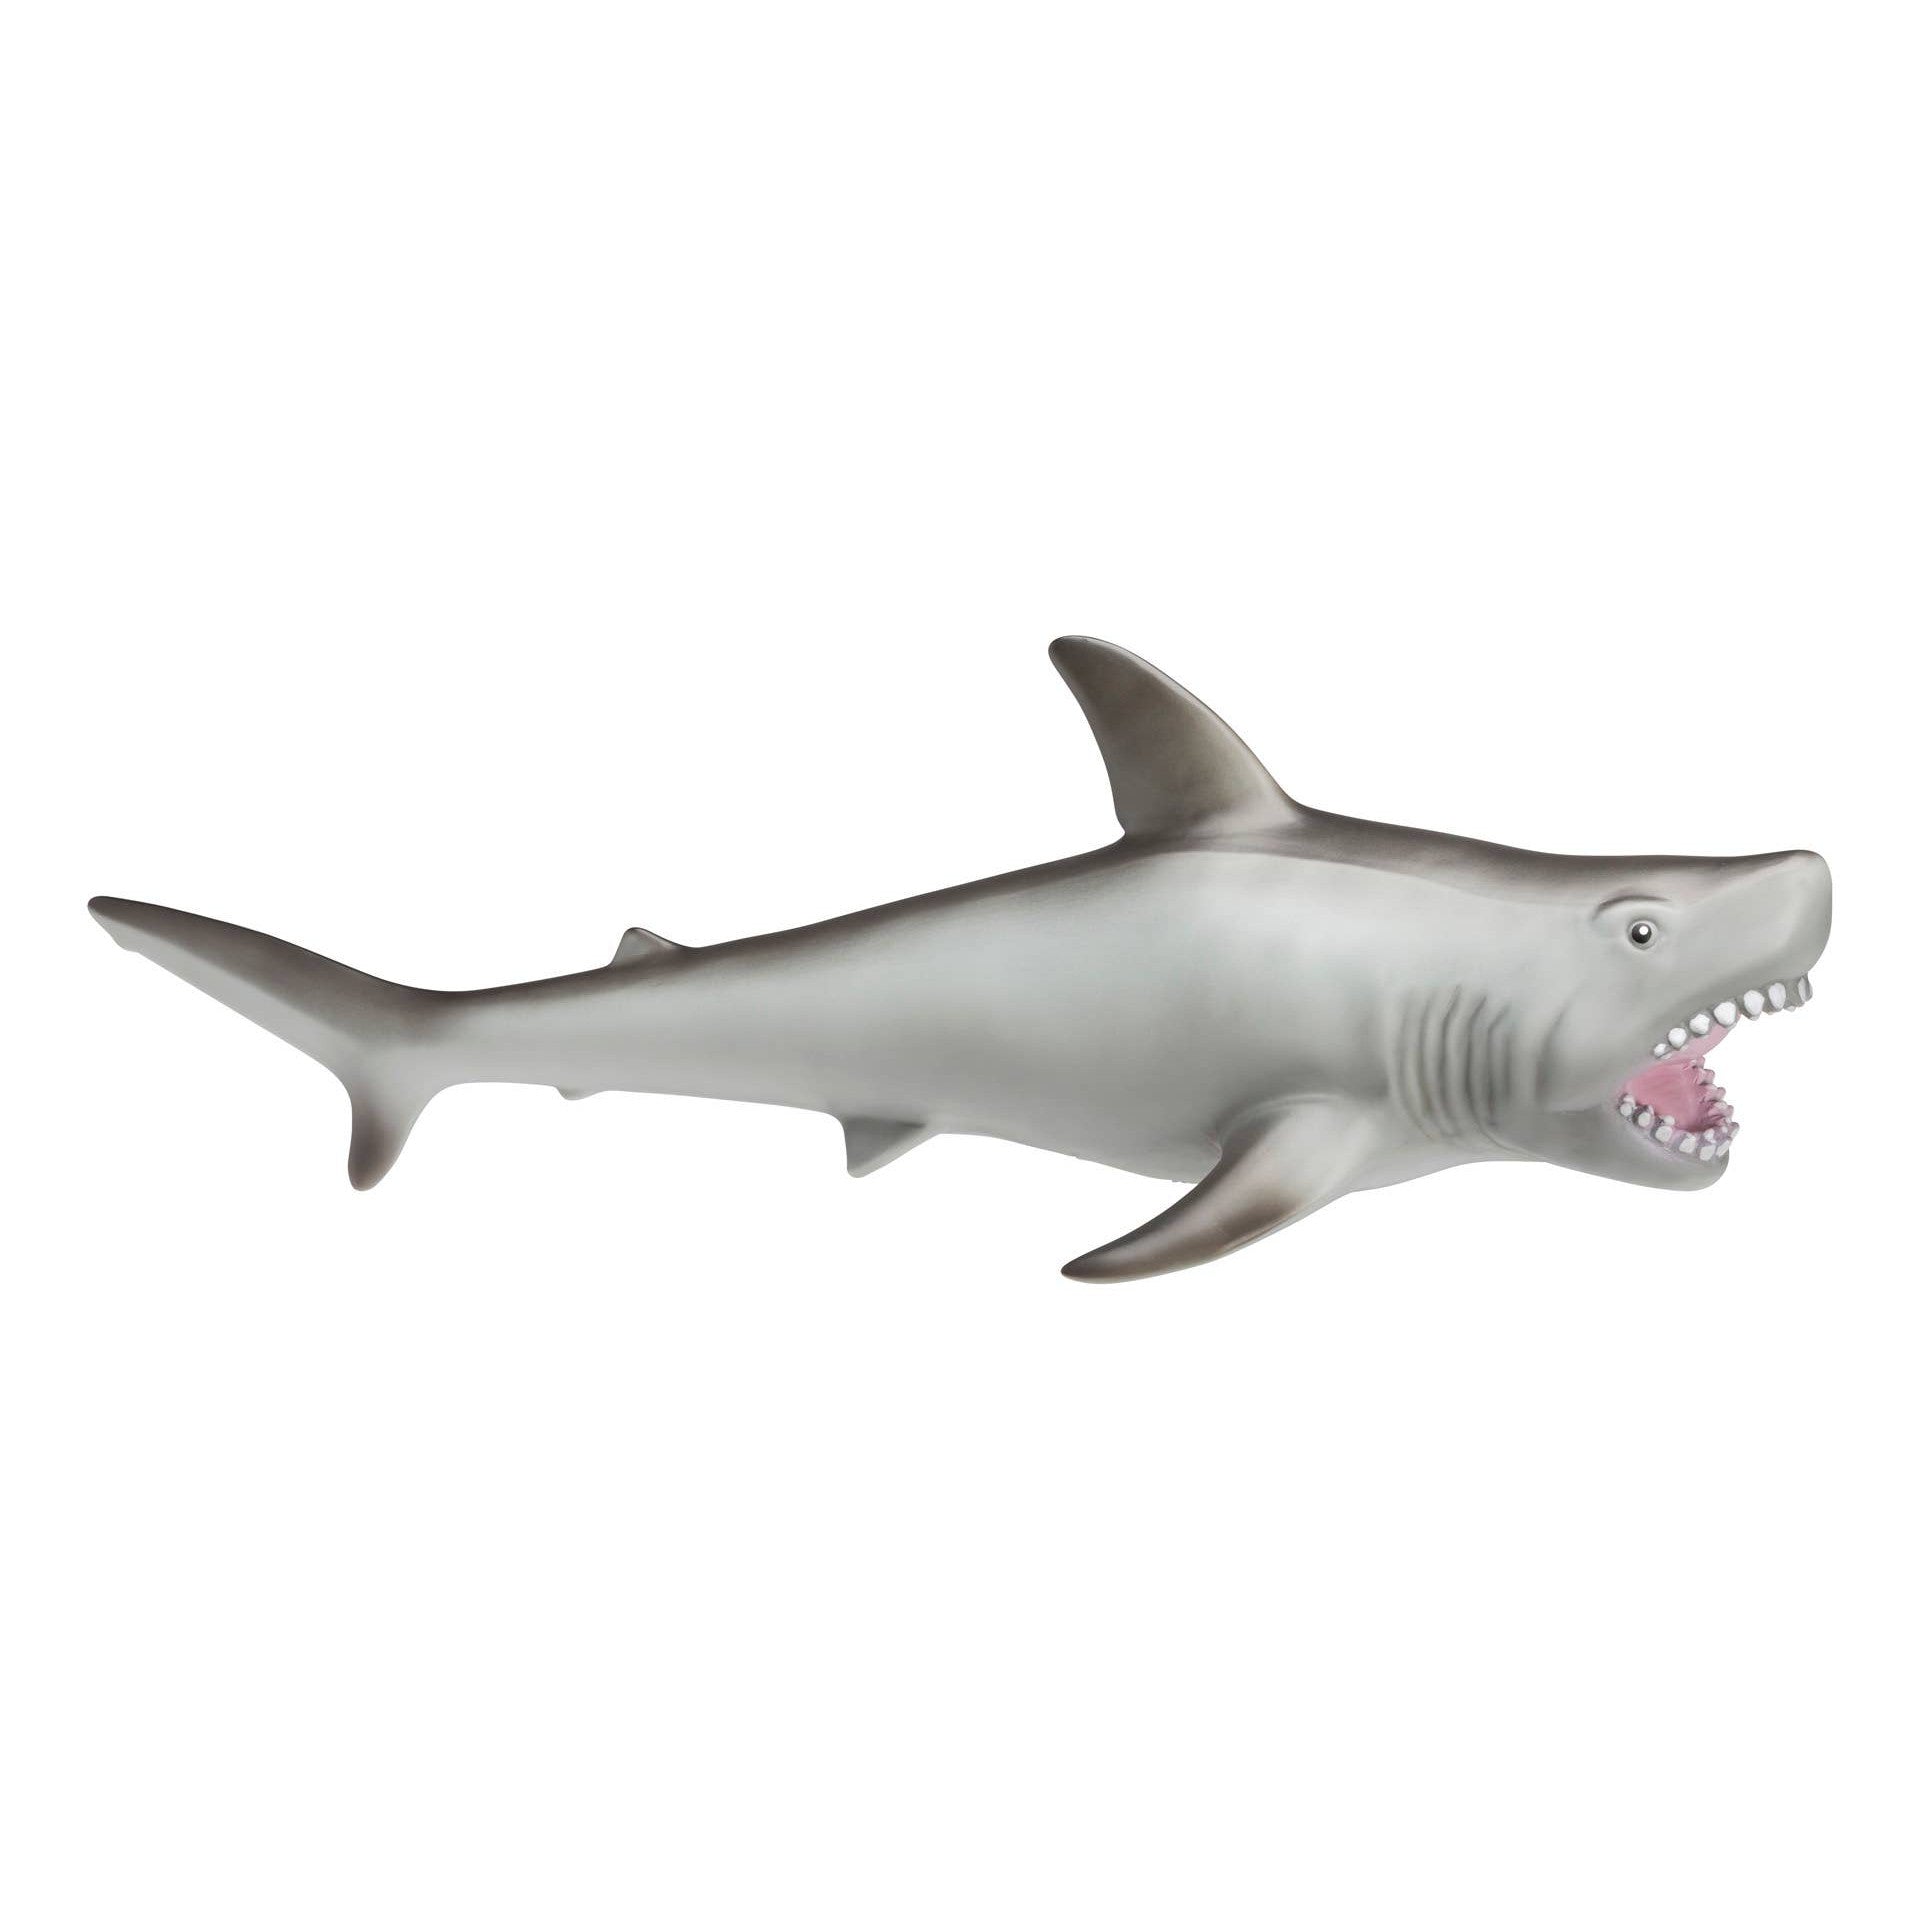 Epic Great White Shark, Giant, Realistic, 21" Long-Novelty-Yellow Springs Toy Company